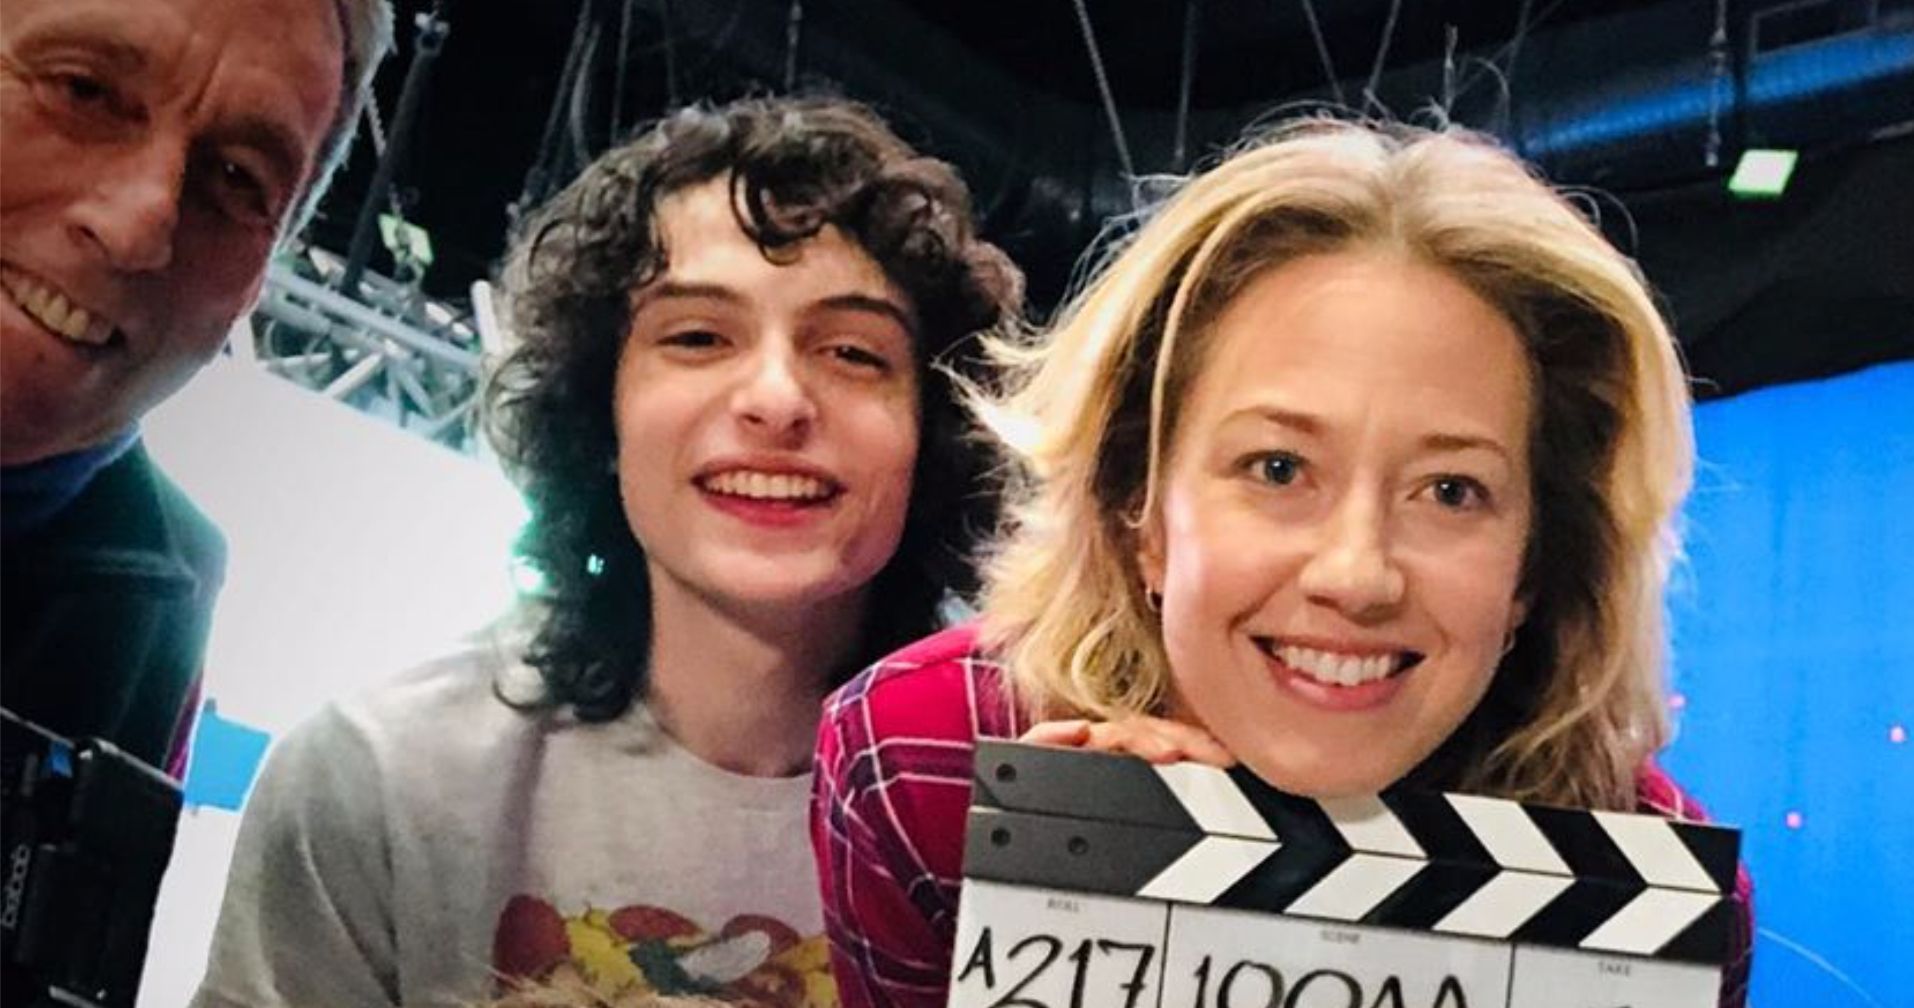 Ghostbusters 2020 Wraps, Director Shares Final Cast Photo from Set